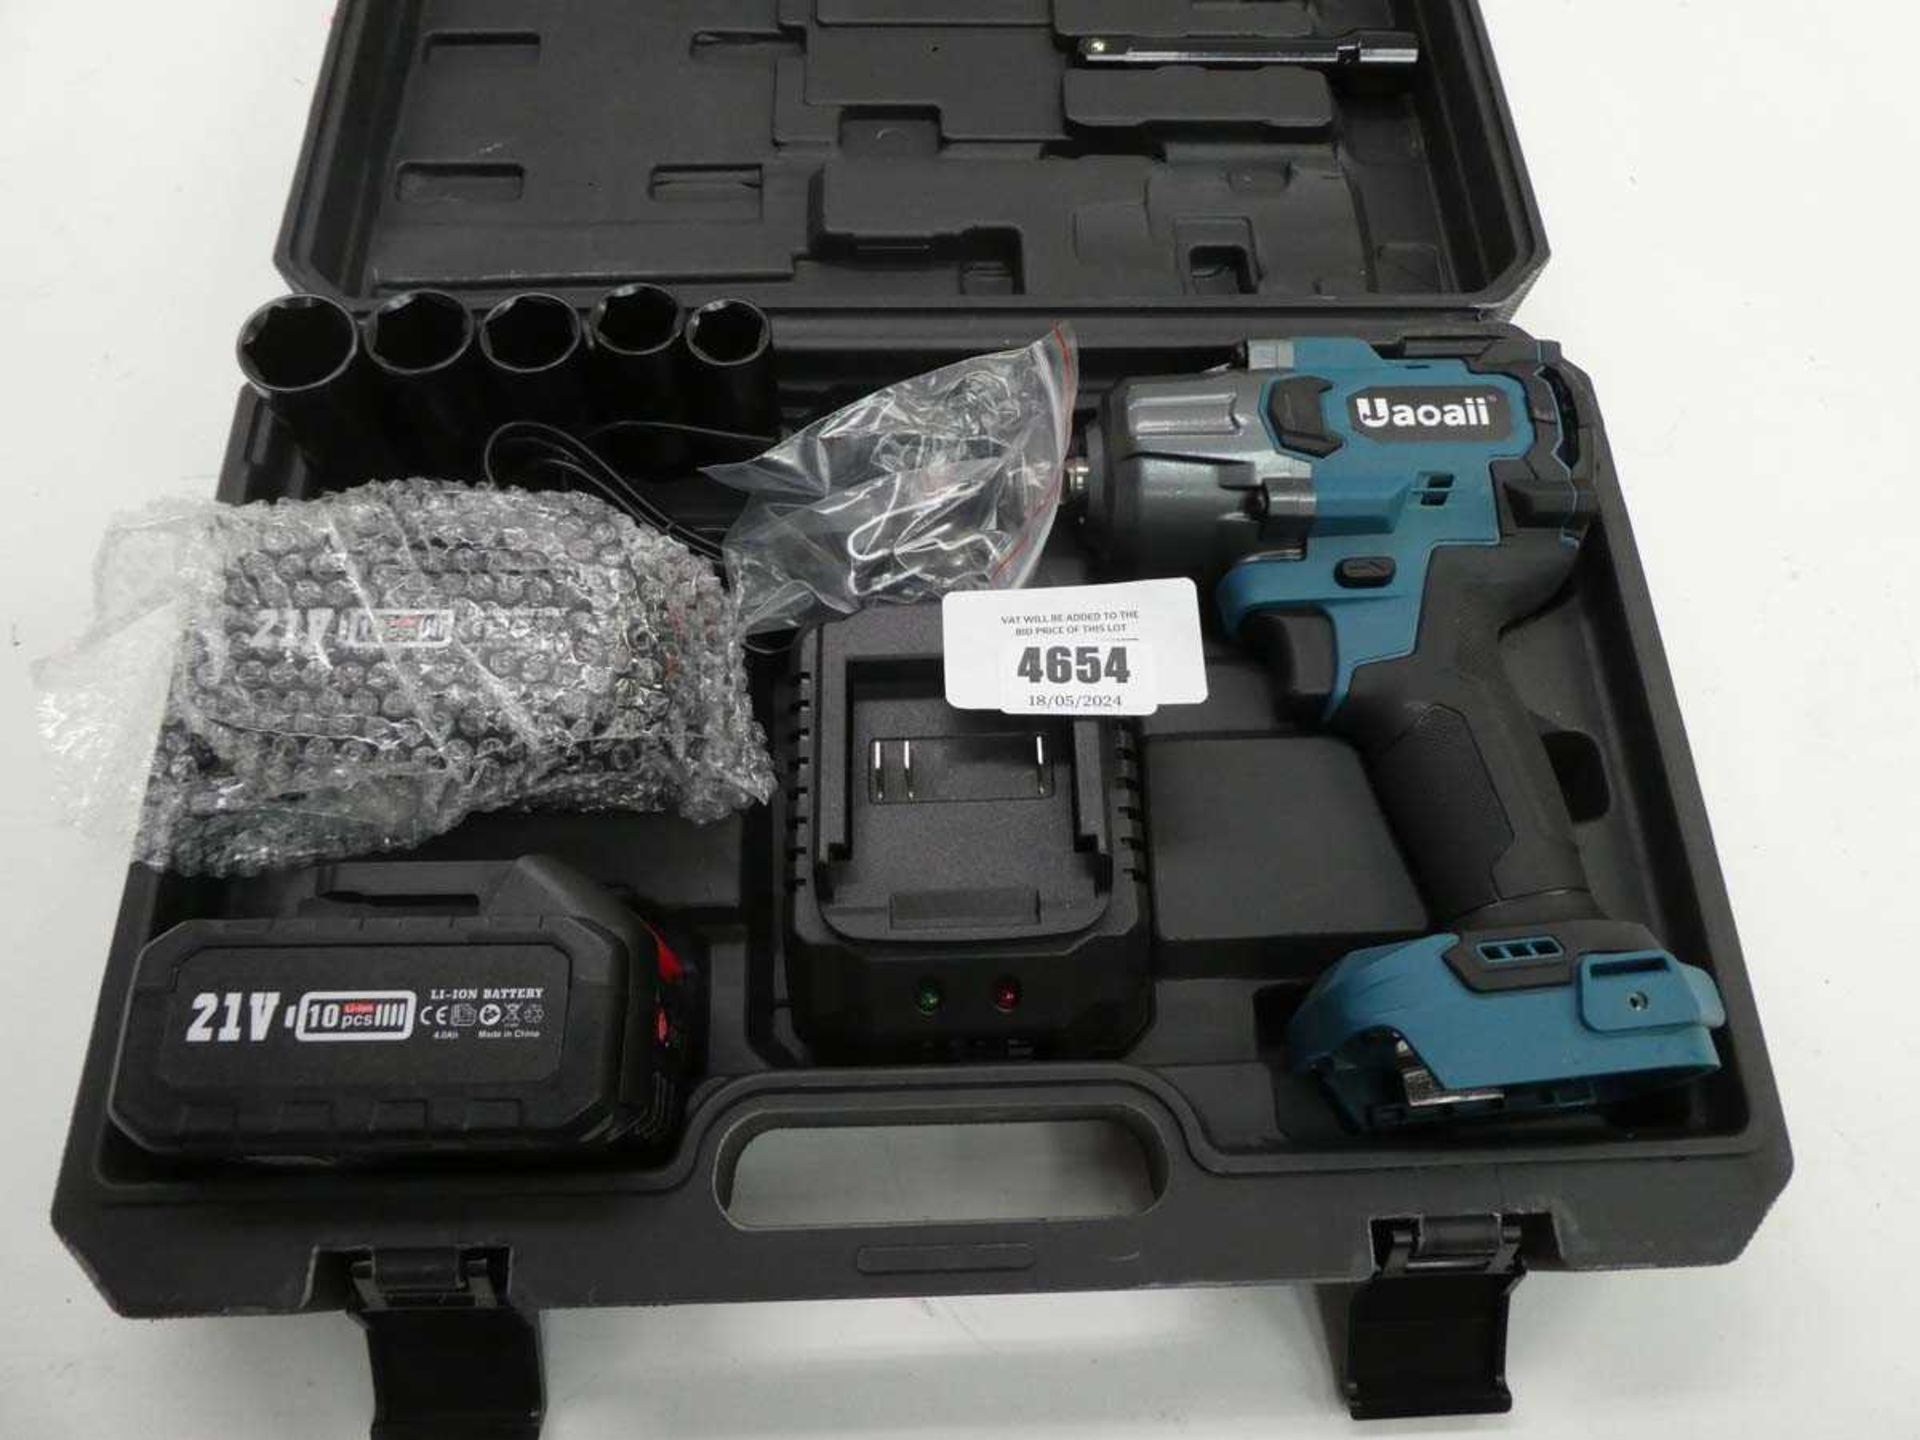 +VAT Uaoaii cordless impact wrench and accessories